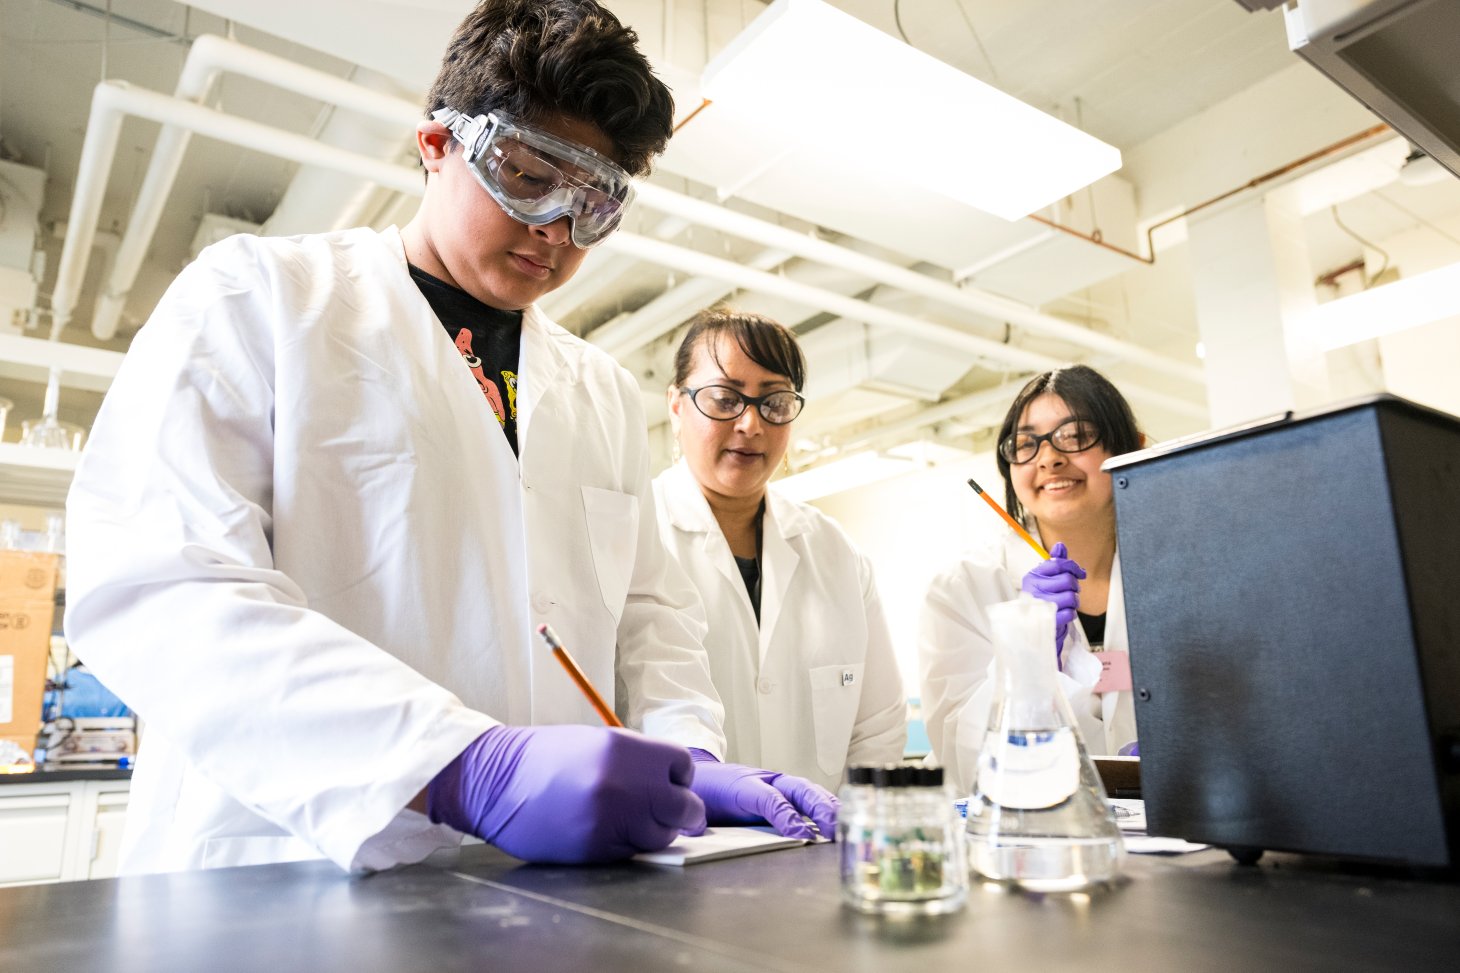 Marilyn Rampersad Mackiewicz mentoring two campers in their chemistry experiments in a lab at Oregon State University.